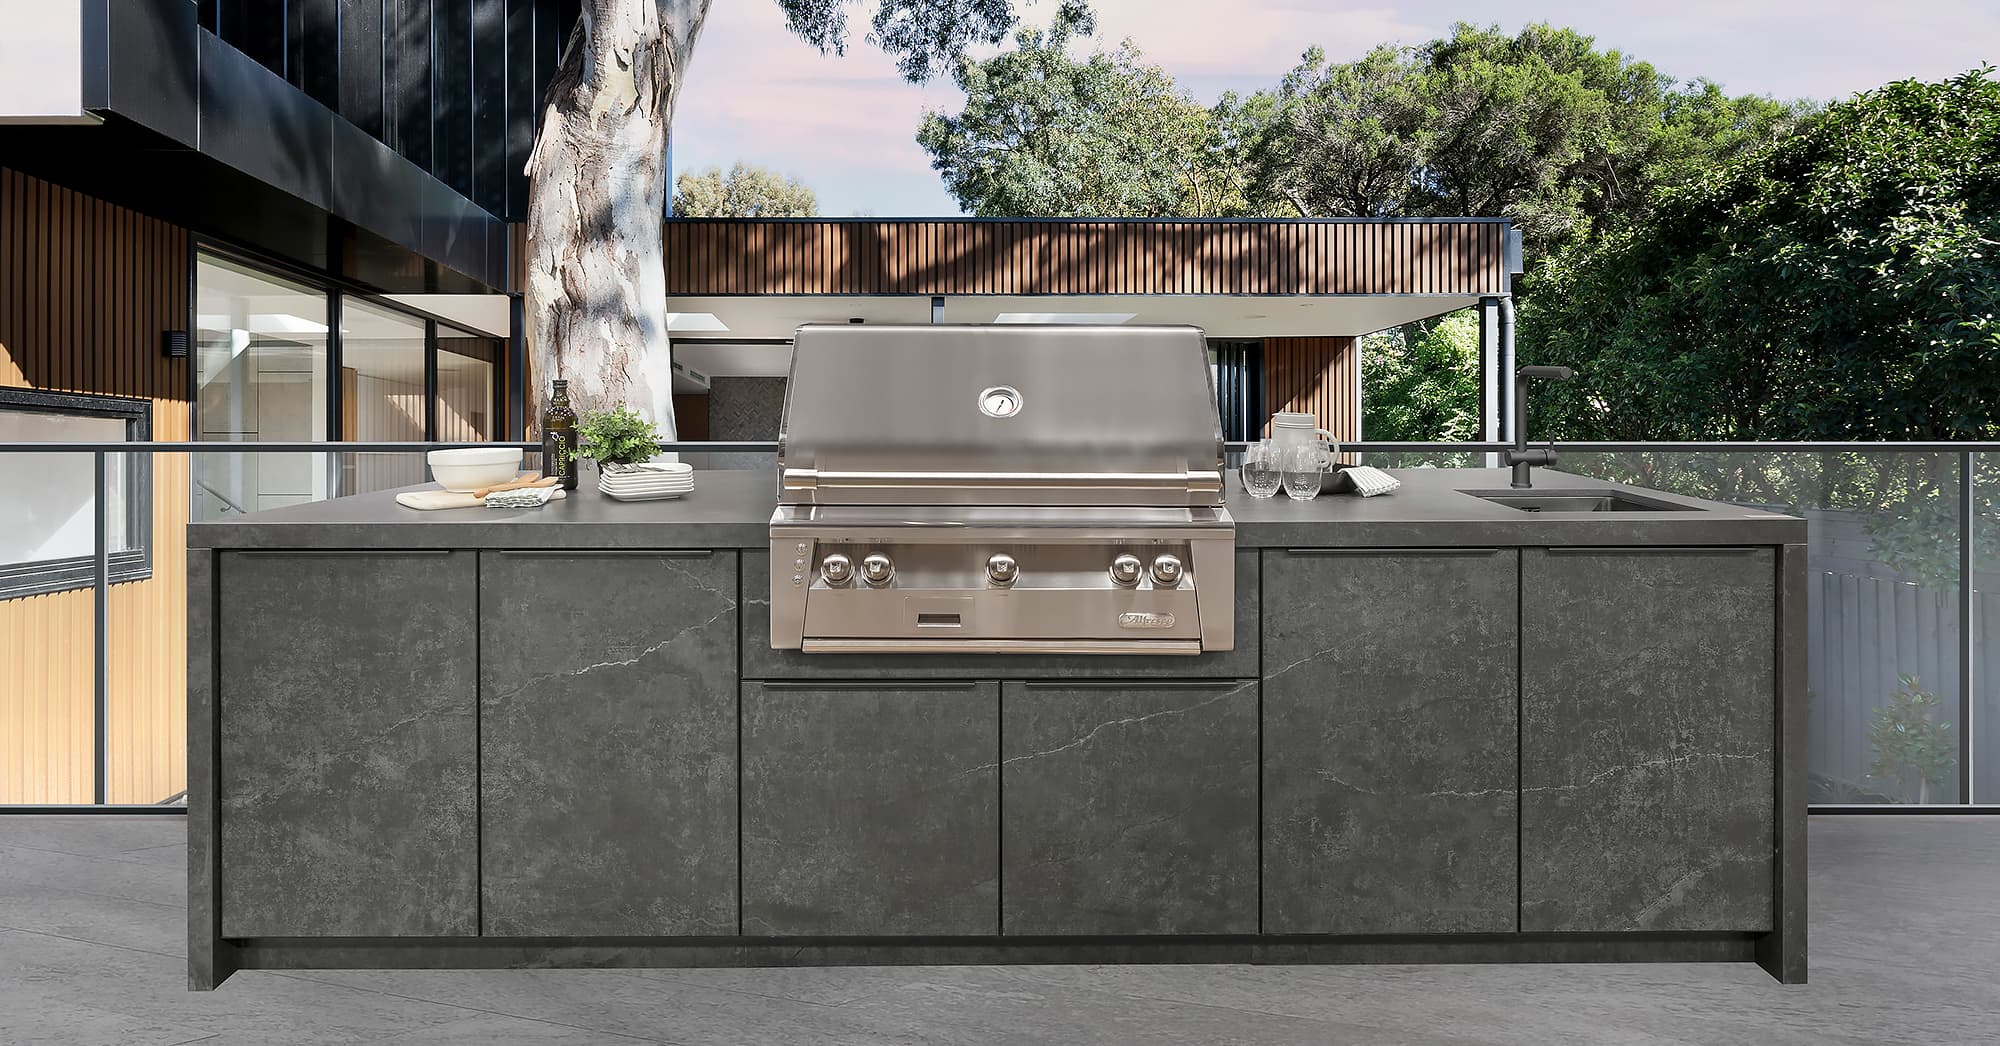 Alumina Architectural Surfaces outdoor kitchen cabinetry